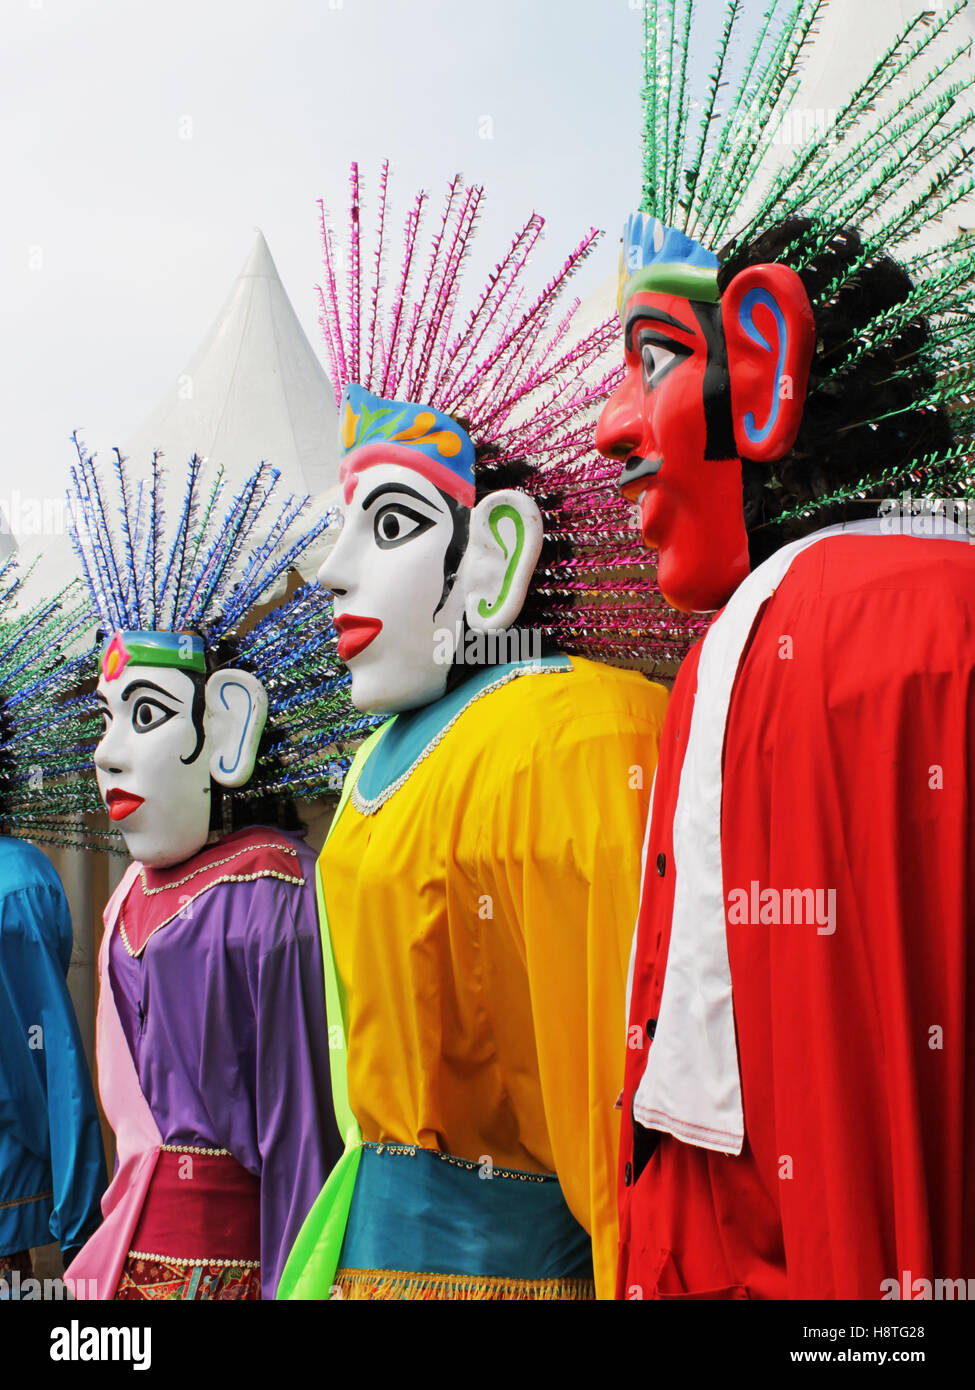 Ondel-ondel, a traditional big doll from Betawi's culture in Jakarta. Stock Photo